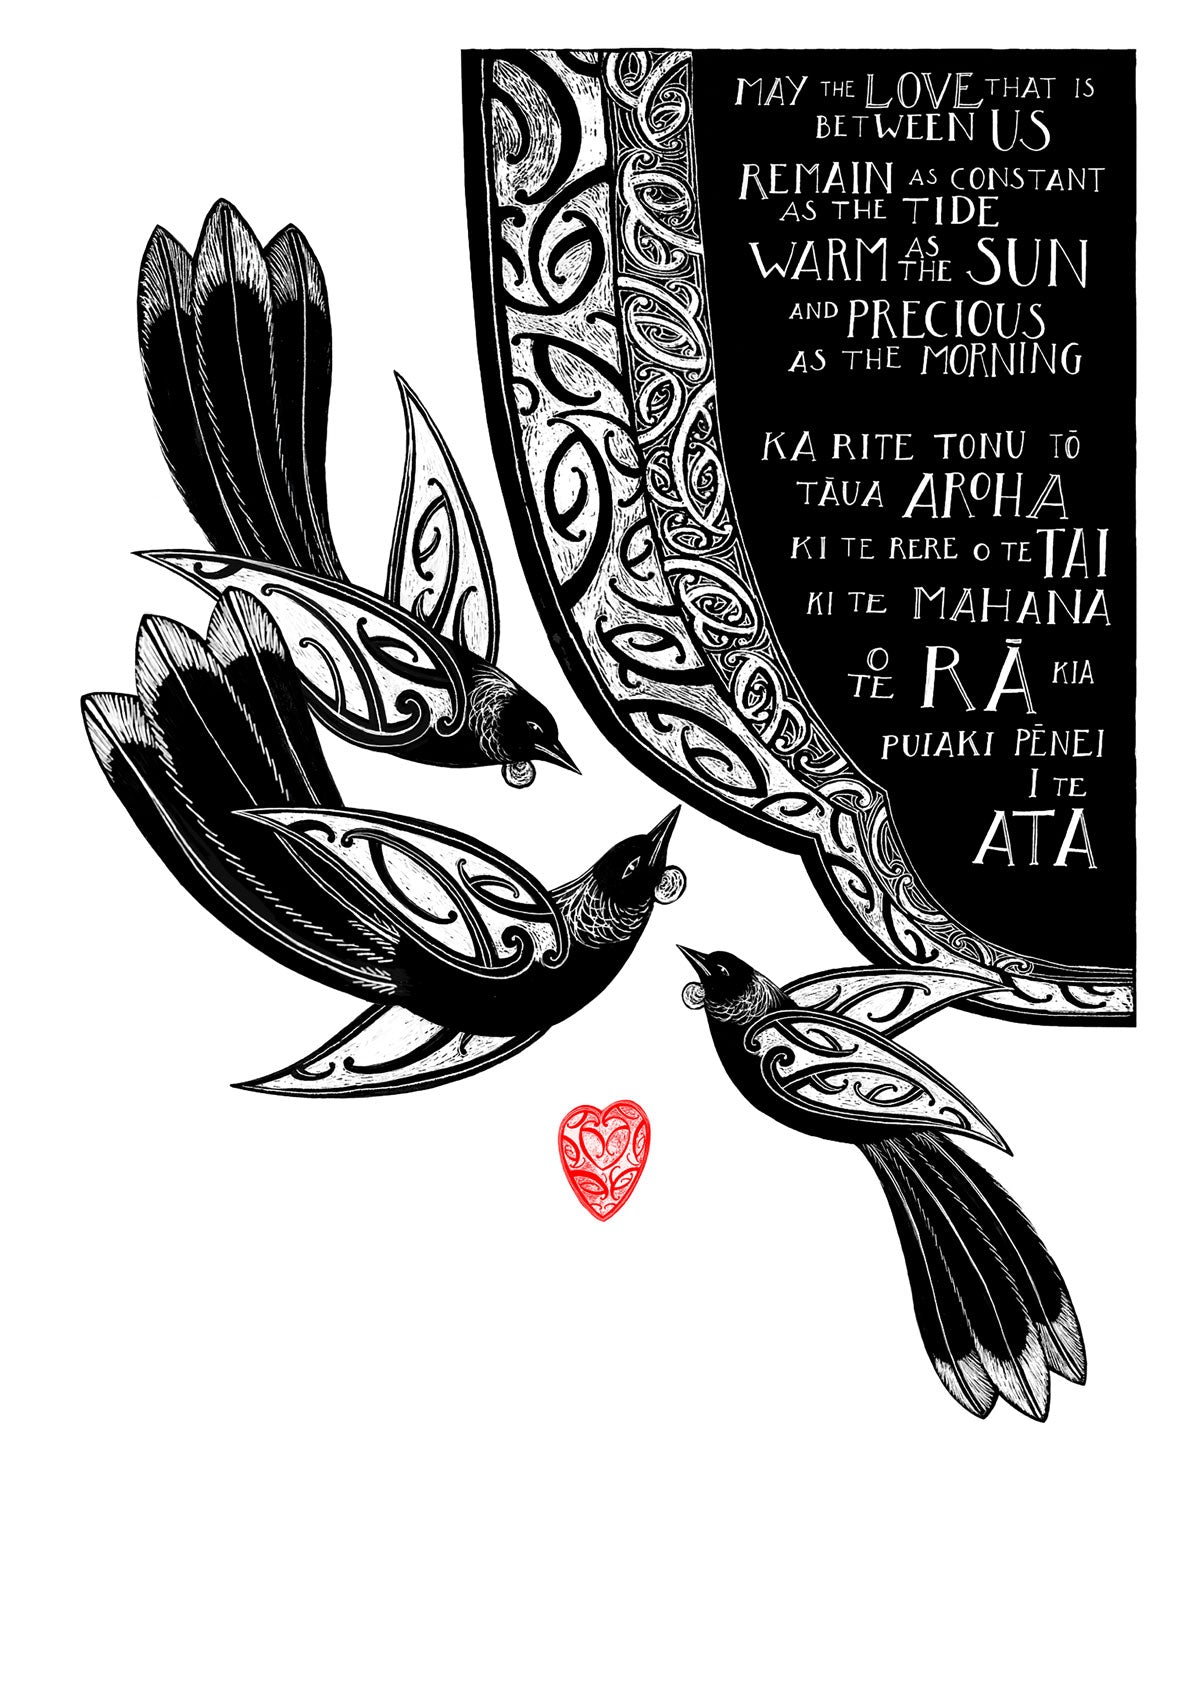 May the love that is between us remain as constant as the tide, as warm as the sun, and as precious as the morning. Maori art design tui birds and aroha love heart with words in te reo Maori and english translation Limited edition fine art by Amber Smith nz artist.